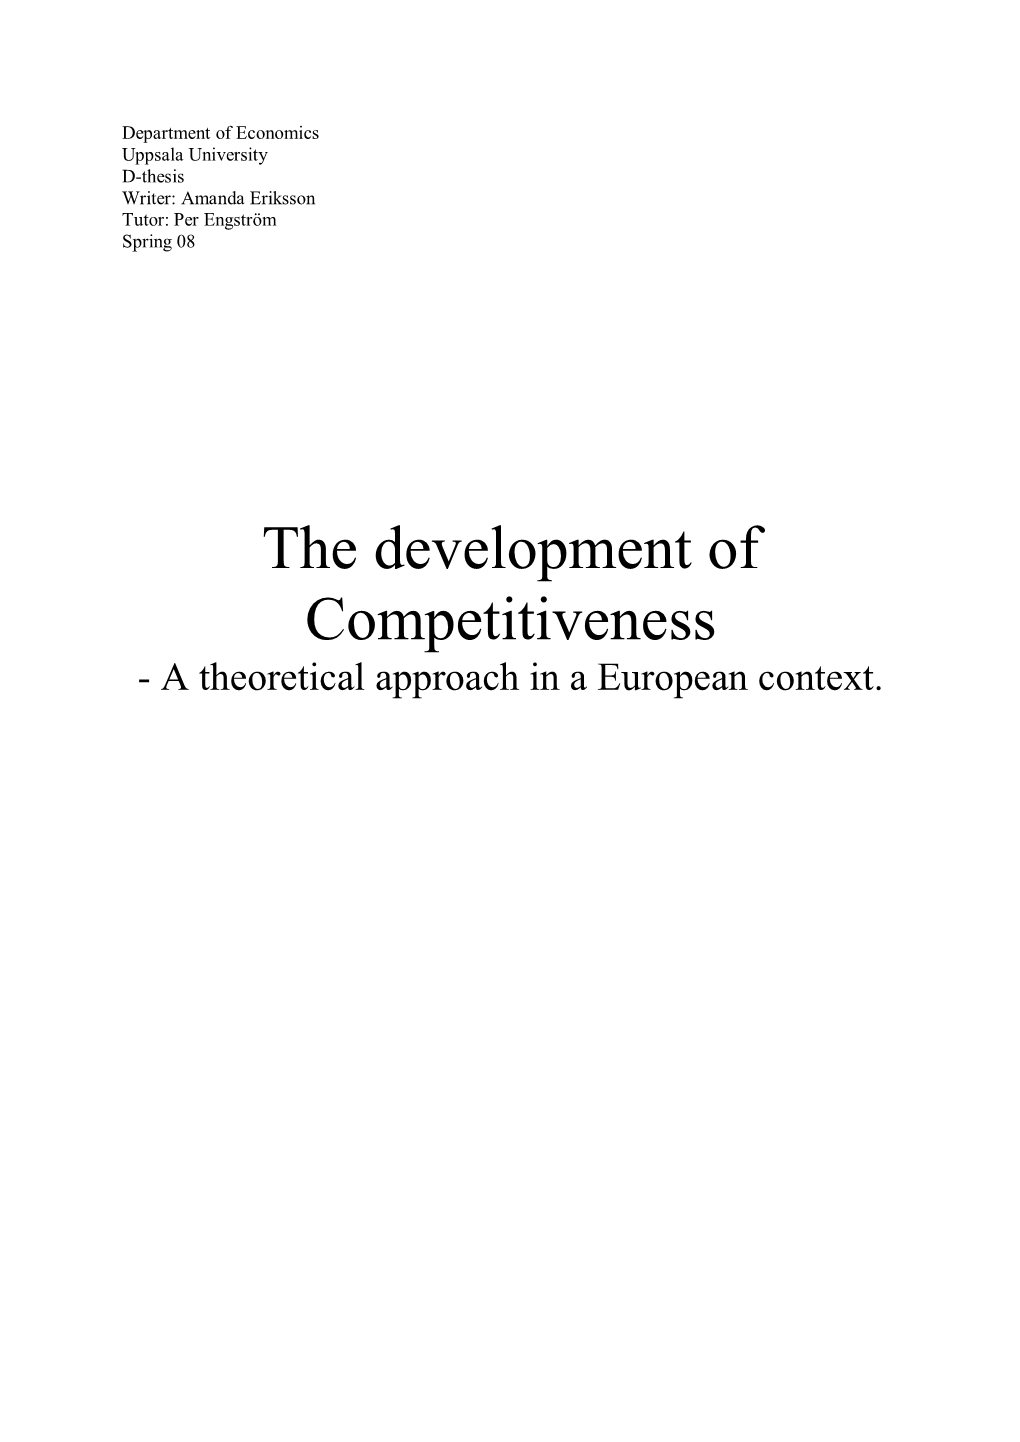 The Development of Competitiveness - a Theoretical Approach in a European Context